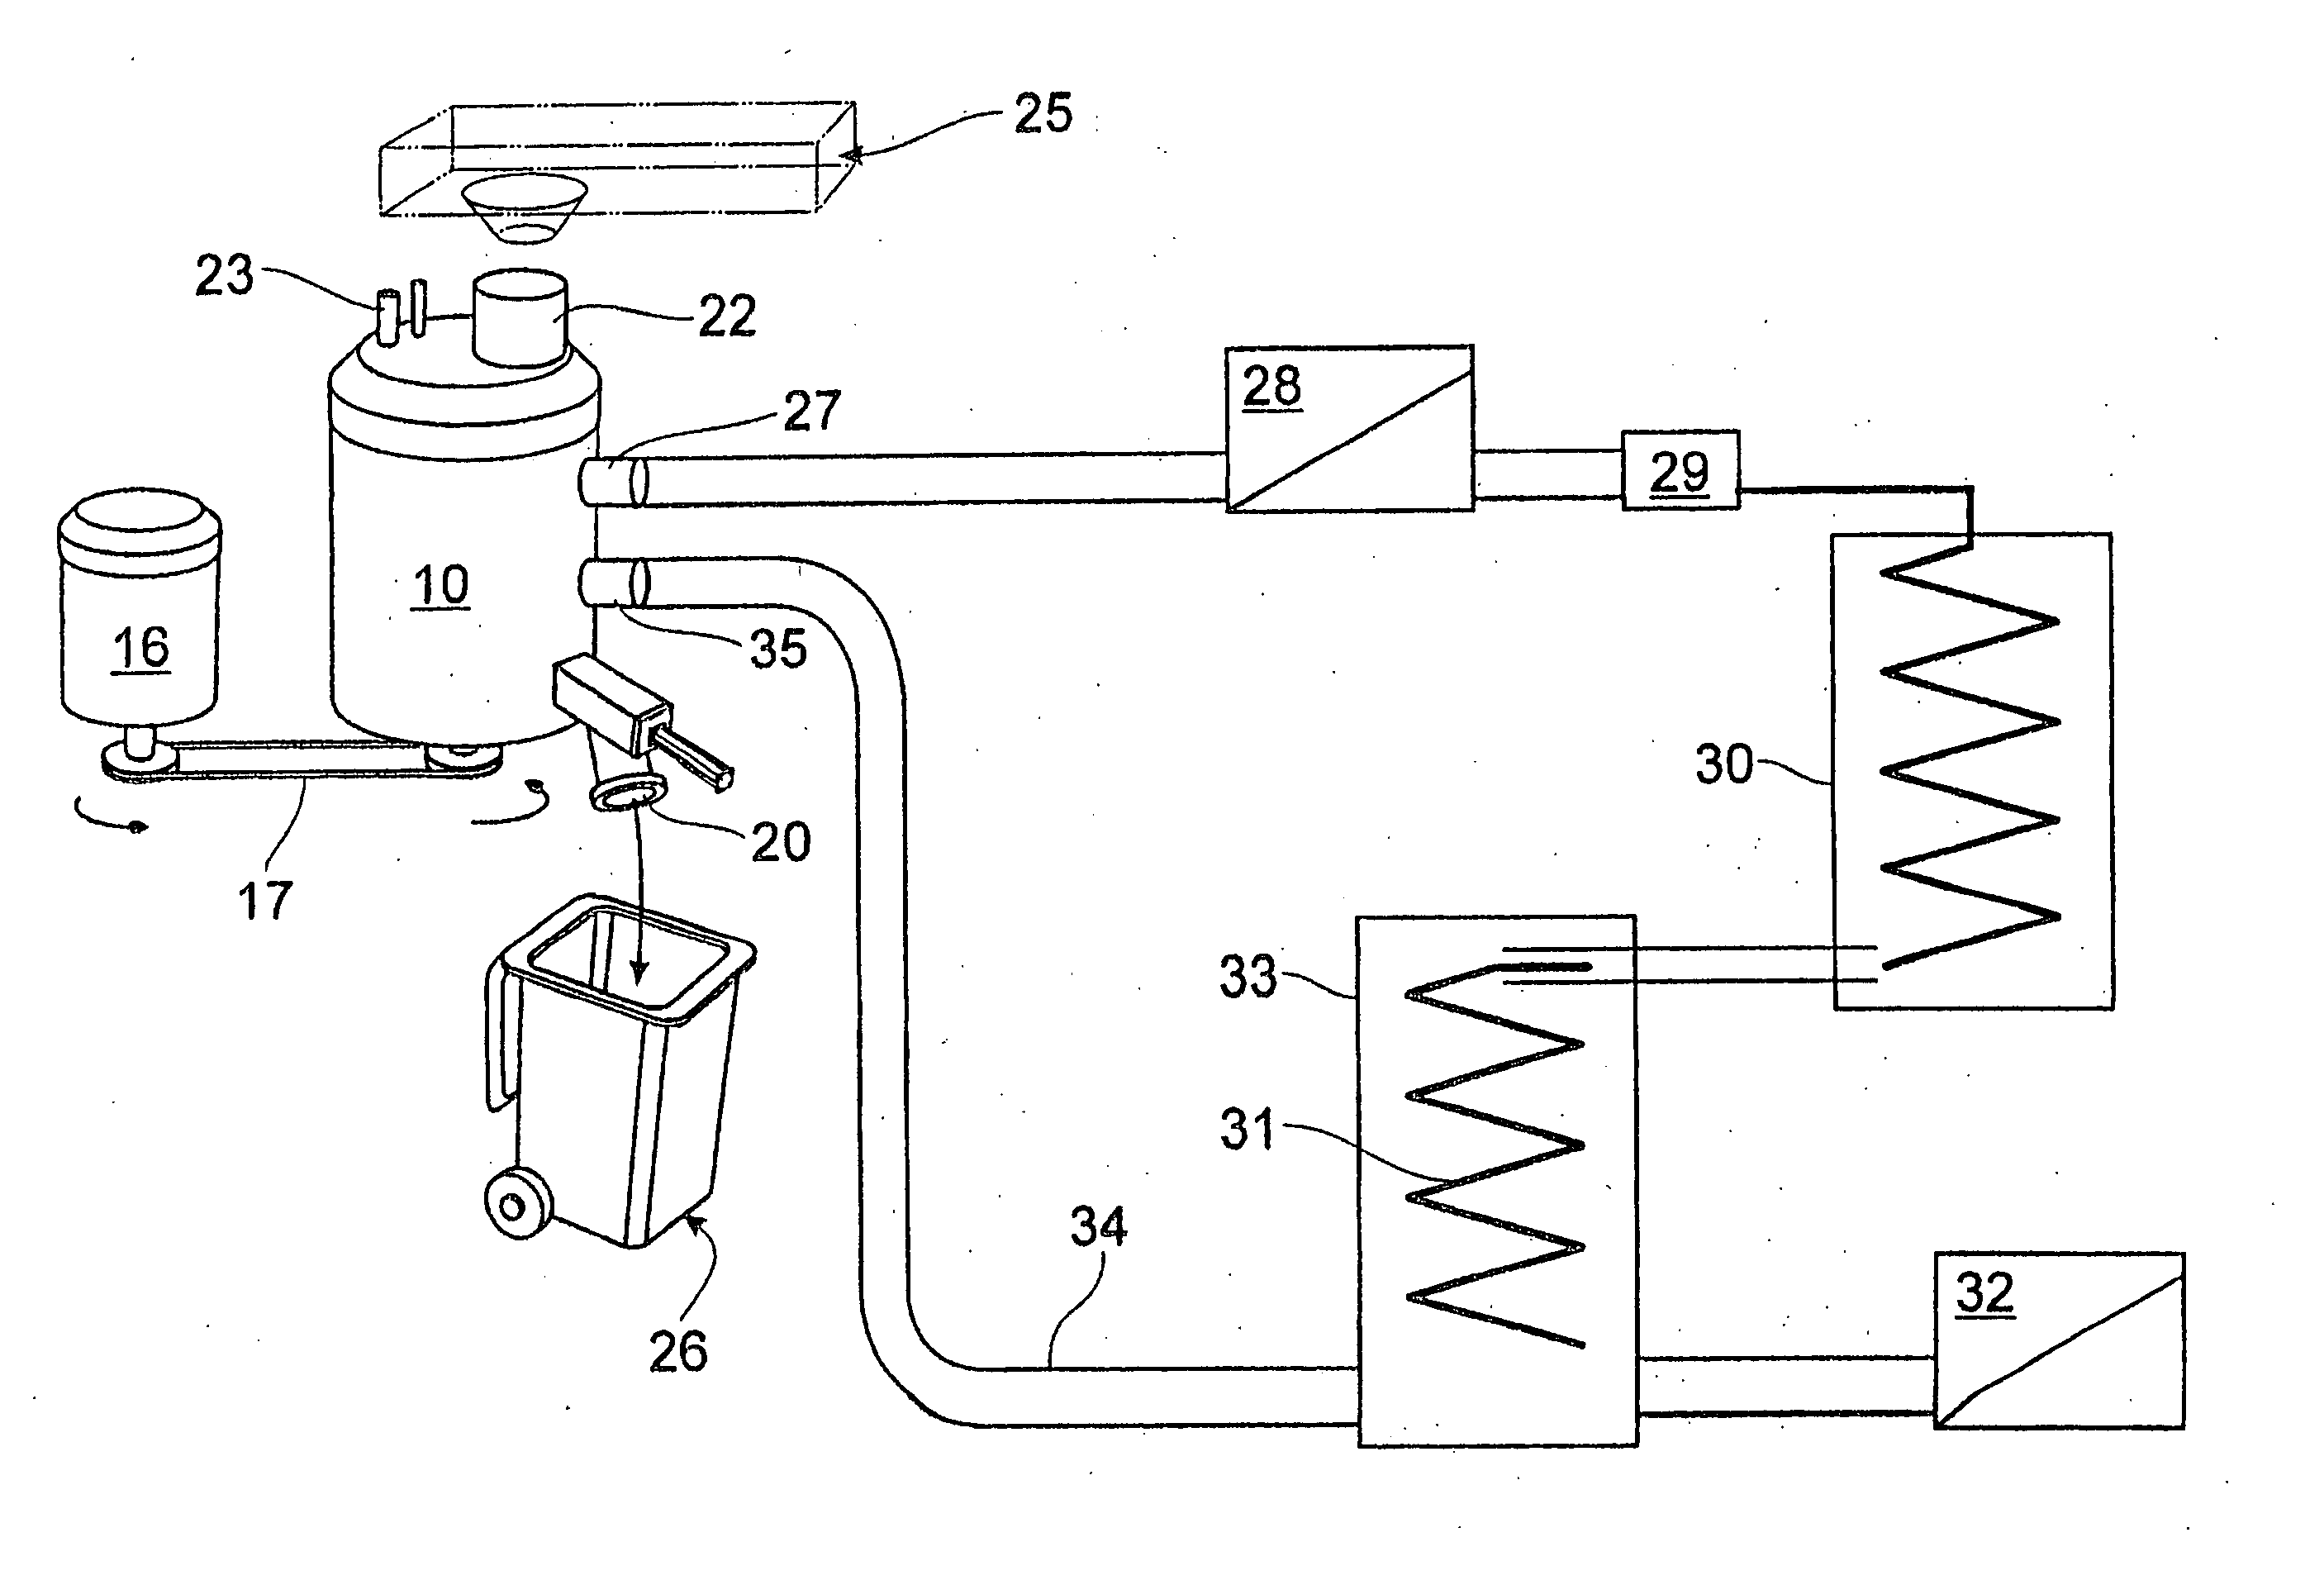 Dispensing unit for ice or snow-like particles